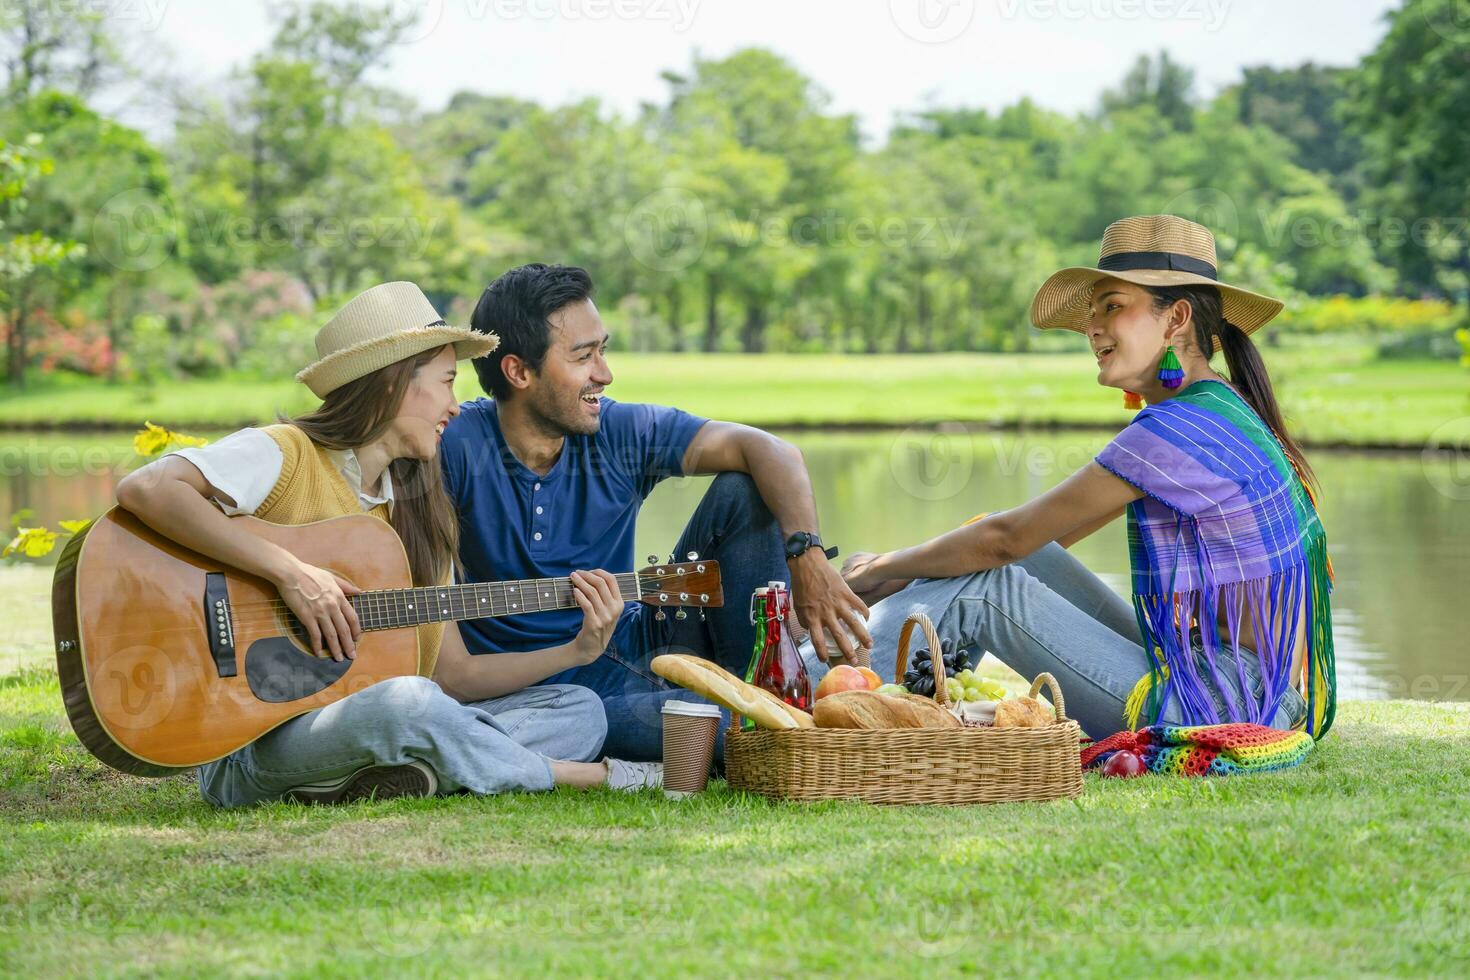 young diversity genders friends,man,woman and woman transgender enjoy leisure time in the park,having picnic,playing music take pleasure in nature,concept of people lifestyle,holiday,resting,relaxing photo